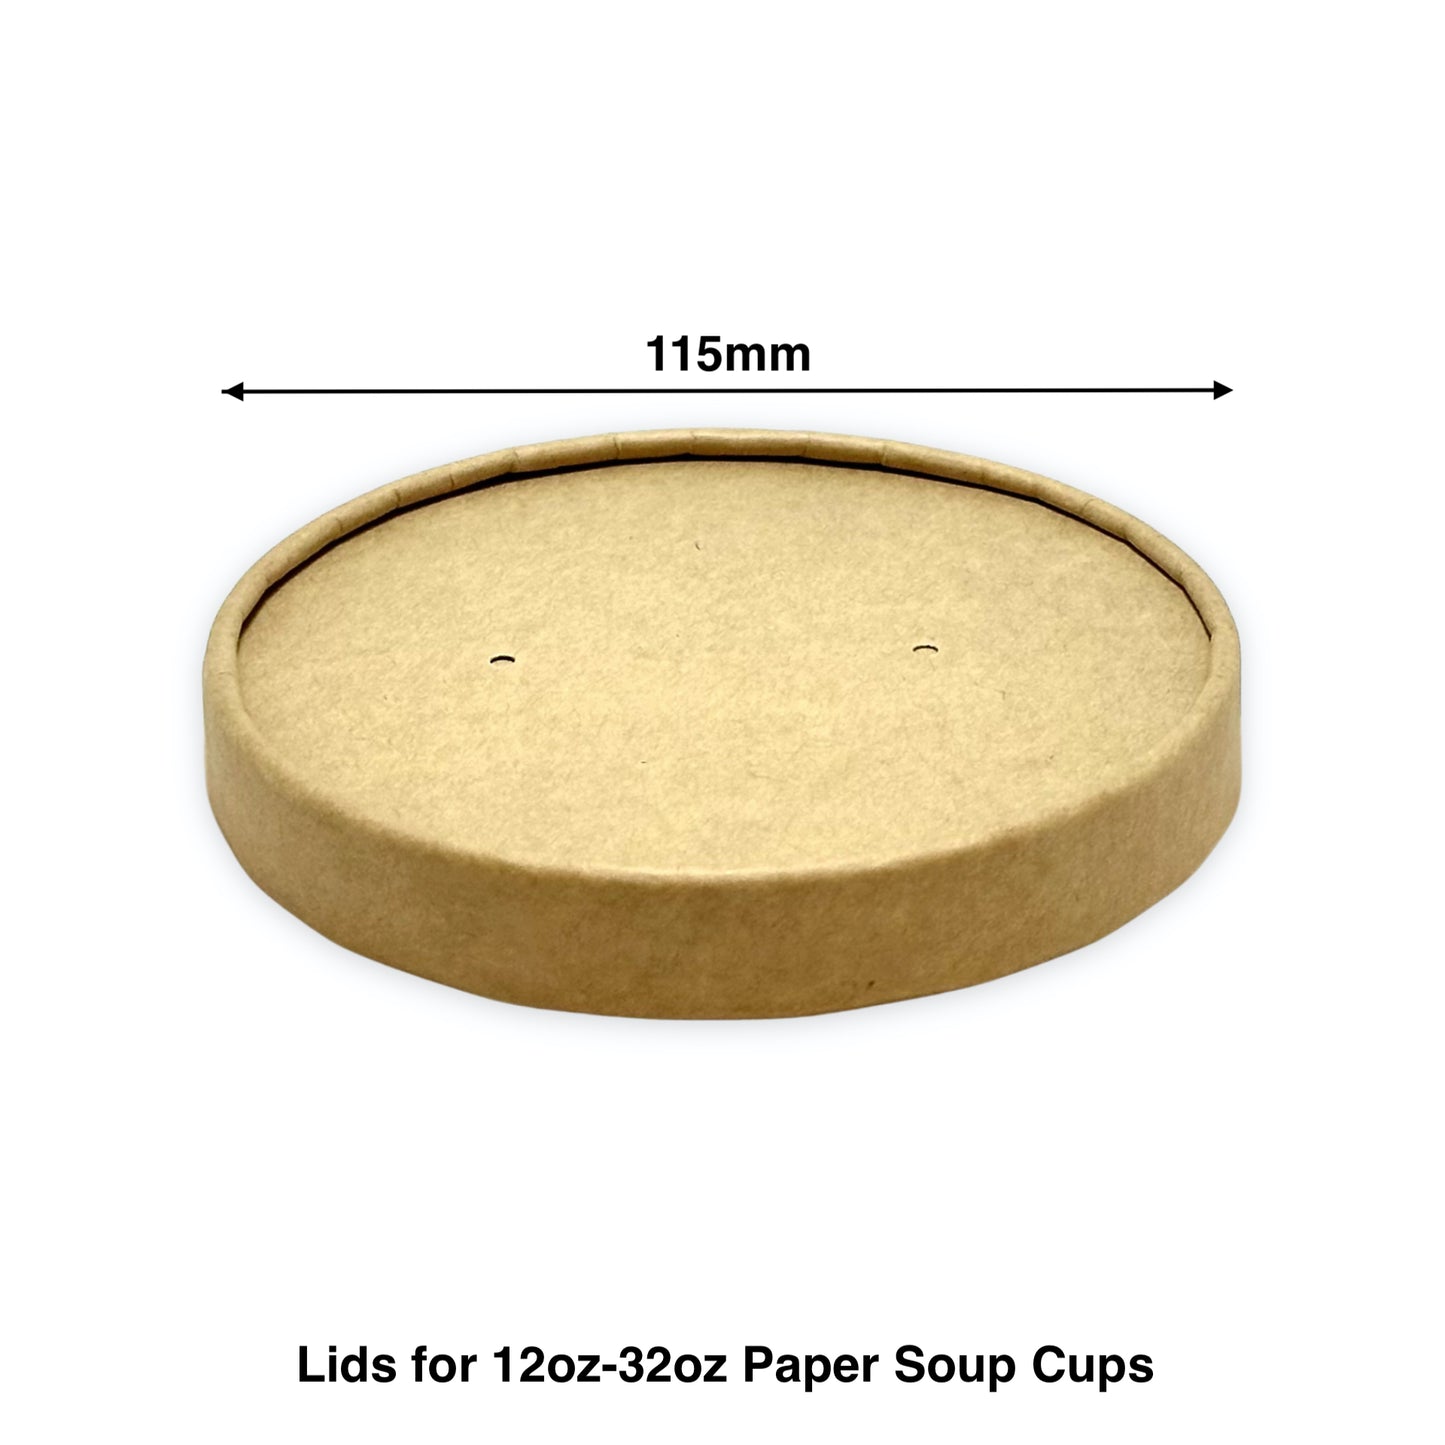 KIS-PA115 | 115mm Kraft Paper Lid for 12oz-32oz Paper Soup Container; From $0.16/pc